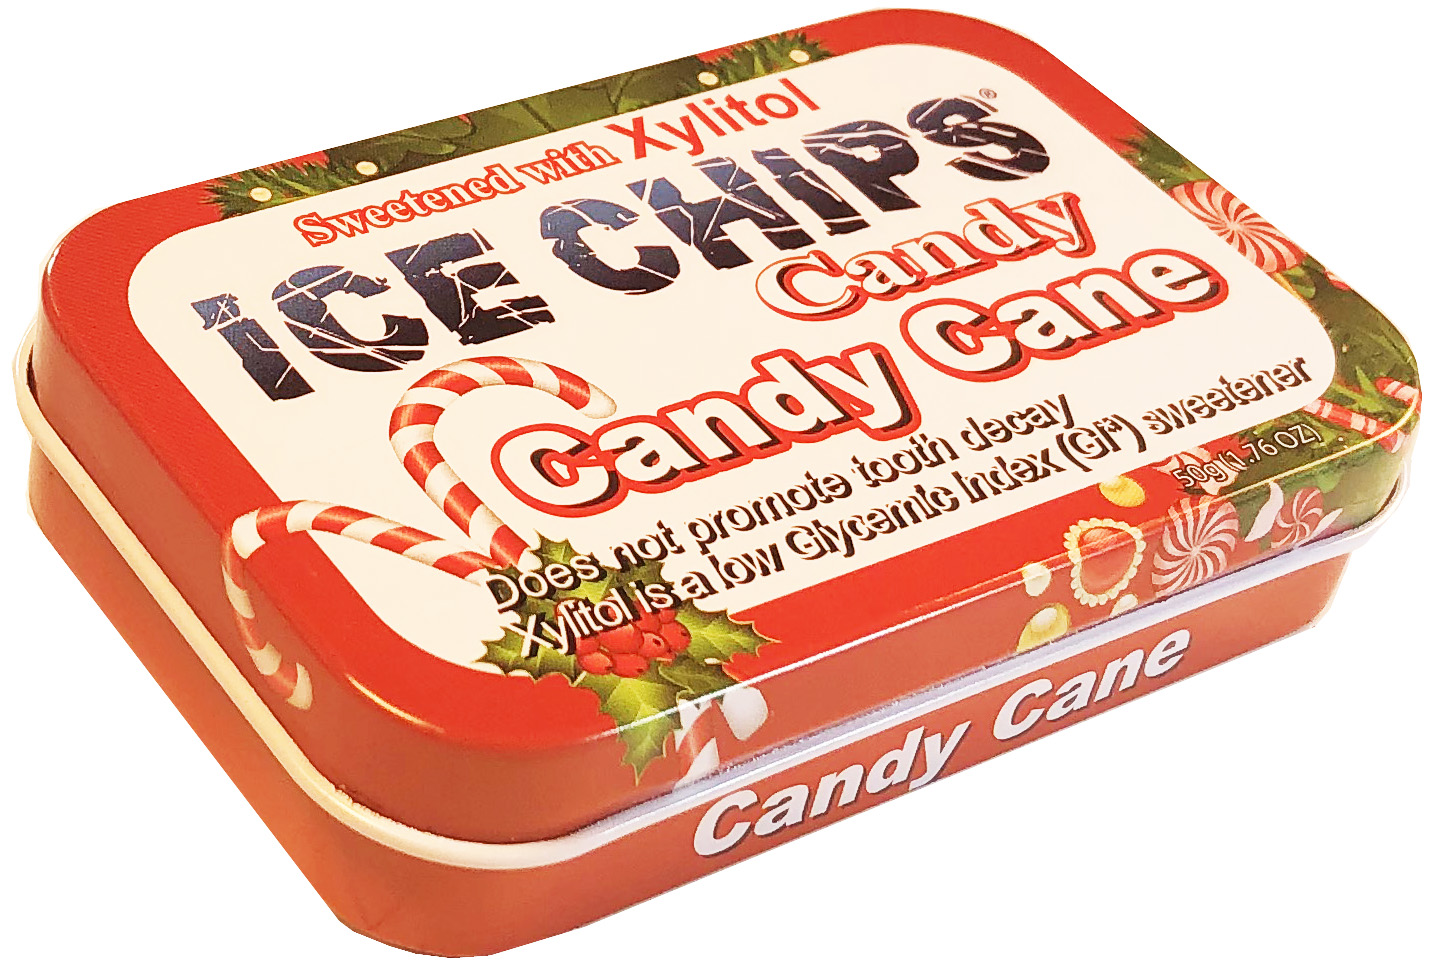 ICE CHIPS® Candy Cane Xylitol Candy